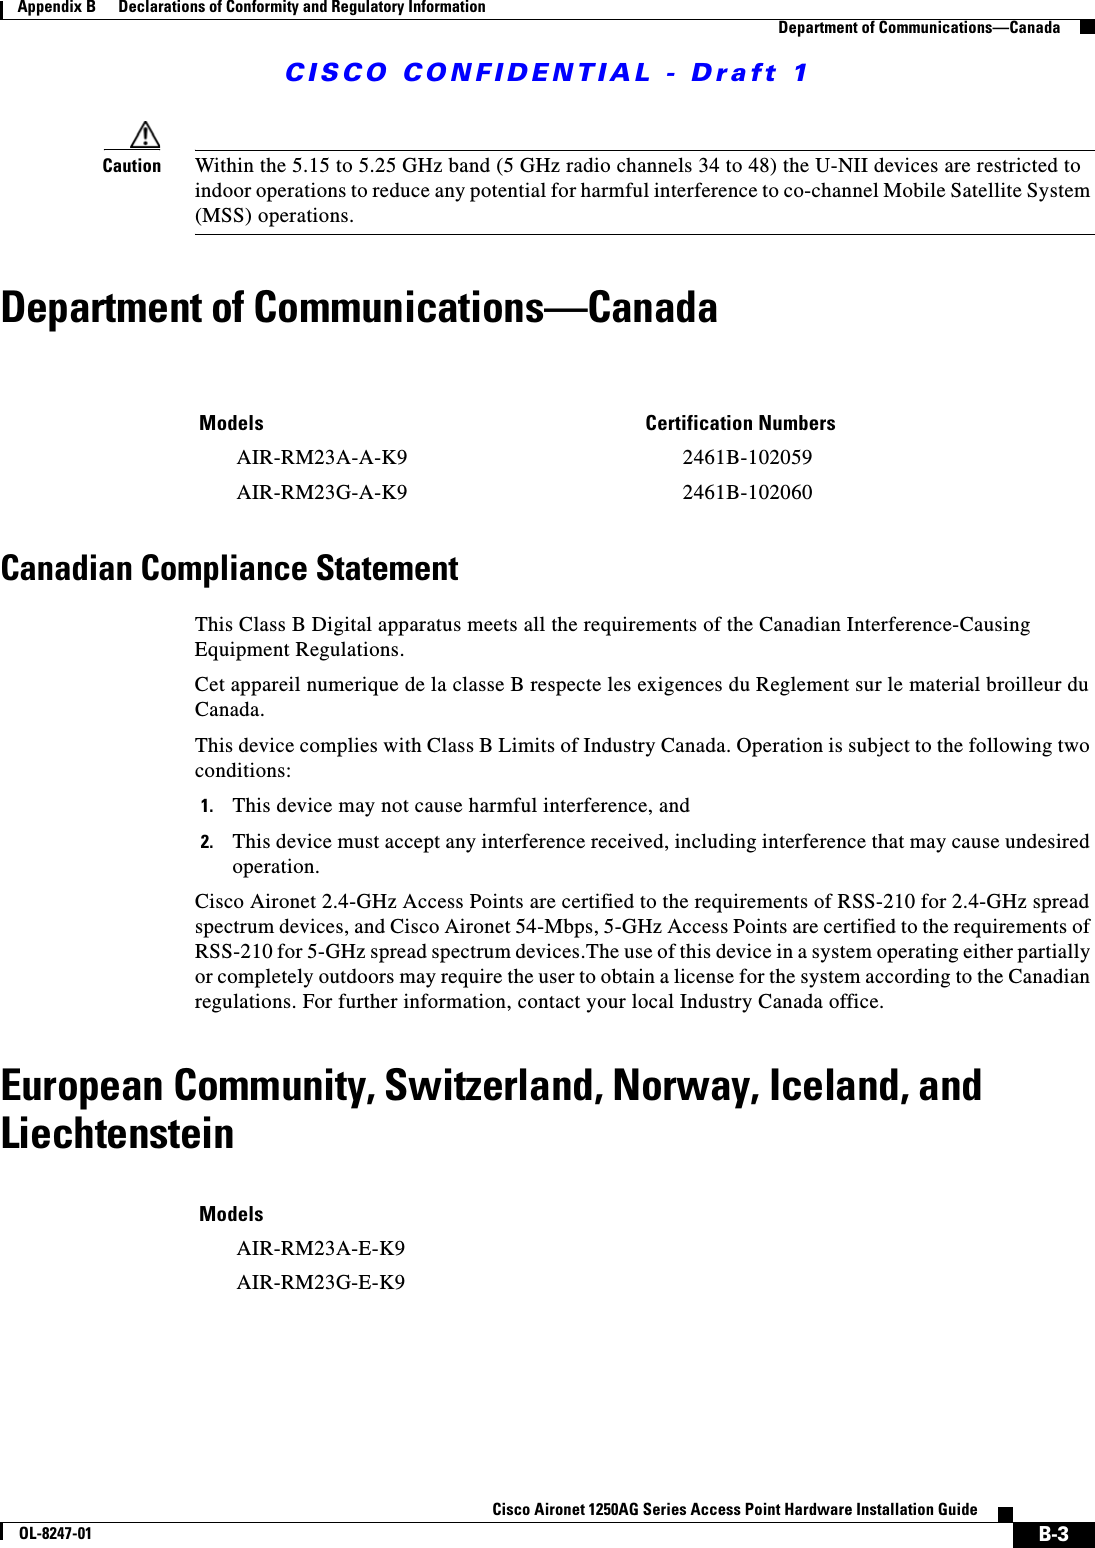 CISCO CONFIDENTIAL - Draft 1B-3Cisco Aironet 1250AG Series Access Point Hardware Installation GuideOL-8247-01Appendix B      Declarations of Conformity and Regulatory InformationDepartment of Communications—CanadaCaution Within the 5.15 to 5.25 GHz band (5 GHz radio channels 34 to 48) the U-NII devices are restricted to indoor operations to reduce any potential for harmful interference to co-channel Mobile Satellite System (MSS) operations.Department of Communications—CanadaCanadian Compliance StatementThis Class B Digital apparatus meets all the requirements of the Canadian Interference-Causing Equipment Regulations.Cet appareil numerique de la classe B respecte les exigences du Reglement sur le material broilleur du Canada.This device complies with Class B Limits of Industry Canada. Operation is subject to the following two conditions:1. This device may not cause harmful interference, and2. This device must accept any interference received, including interference that may cause undesired operation.Cisco Aironet 2.4-GHz Access Points are certified to the requirements of RSS-210 for 2.4-GHz spread spectrum devices, and Cisco Aironet 54-Mbps, 5-GHz Access Points are certified to the requirements of RSS-210 for 5-GHz spread spectrum devices.The use of this device in a system operating either partially or completely outdoors may require the user to obtain a license for the system according to the Canadian regulations. For further information, contact your local Industry Canada office.European Community, Switzerland, Norway, Iceland, and LiechtensteinModels Certification NumbersAIR-RM23A-A-K9 2461B-102059AIR-RM23G-A-K9 2461B-102060ModelsAIR-RM23A-E-K9AIR-RM23G-E-K9